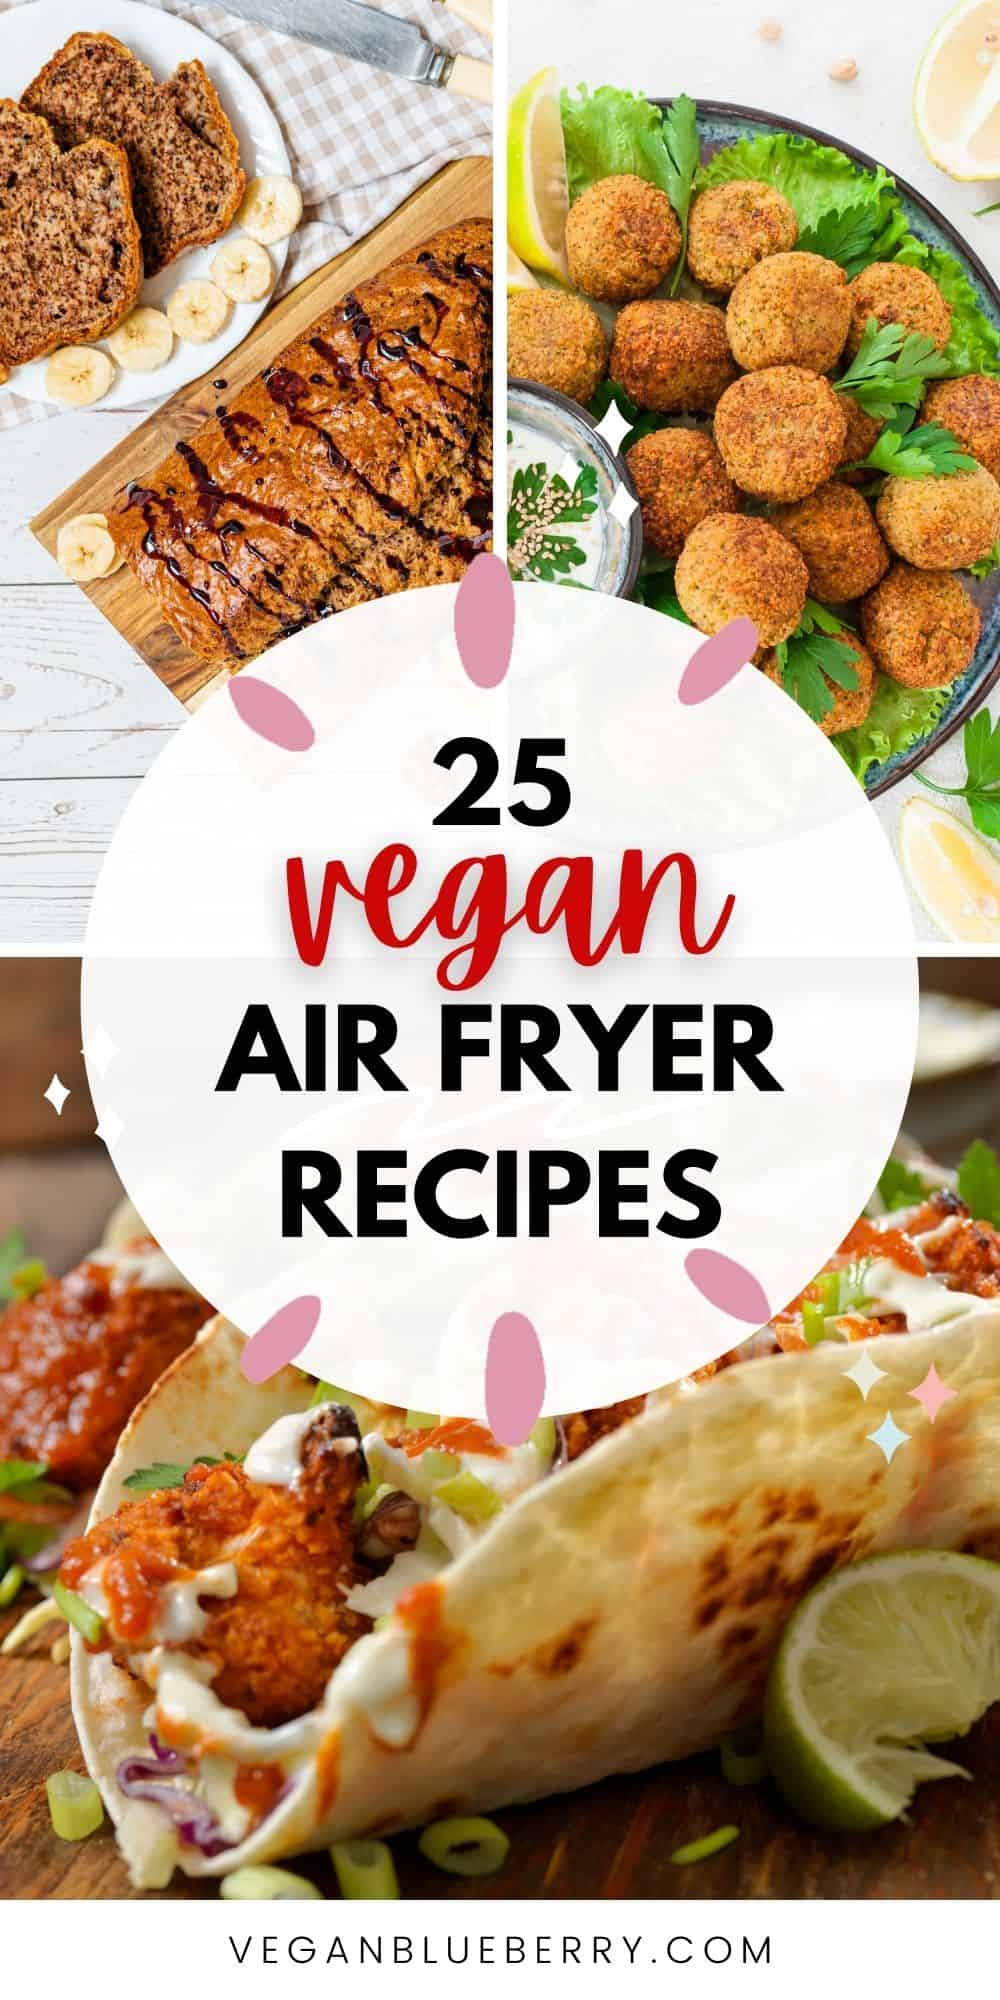 Pinterest image with text: 25 vegan air fryer recipes: breakfast, lunch, and dinner